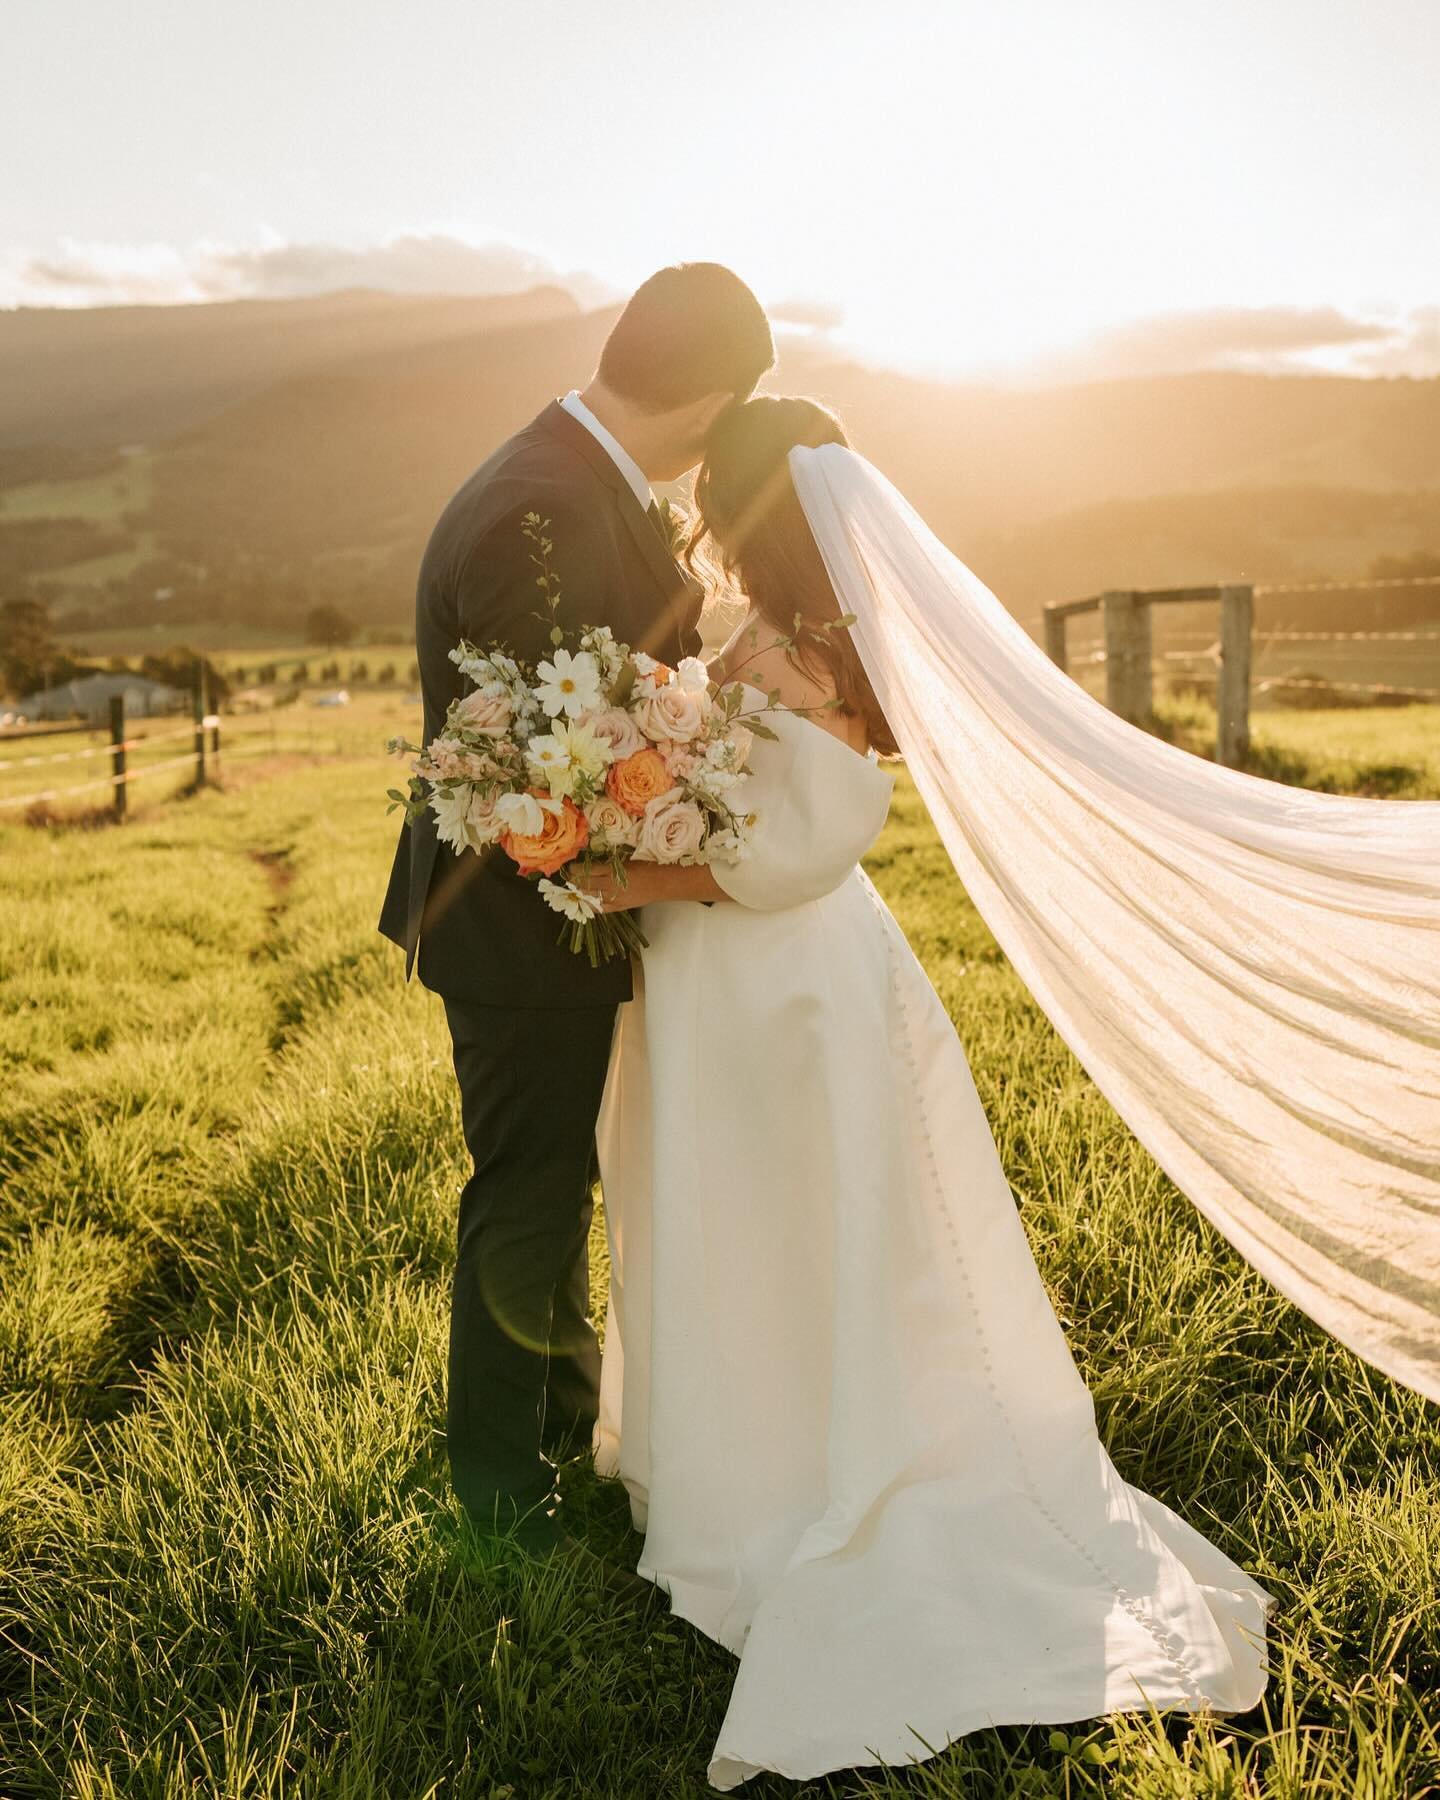 Grace and Ben ✨ 
The most magical moment of sunlight popping out to give us the most gorgeous golden light. A few happy tears were shed  by Grace and we shared in the sweetest moment a top the ridge 🥹😍❤️✨ 

#intimatewedding #weddingphotography #gol